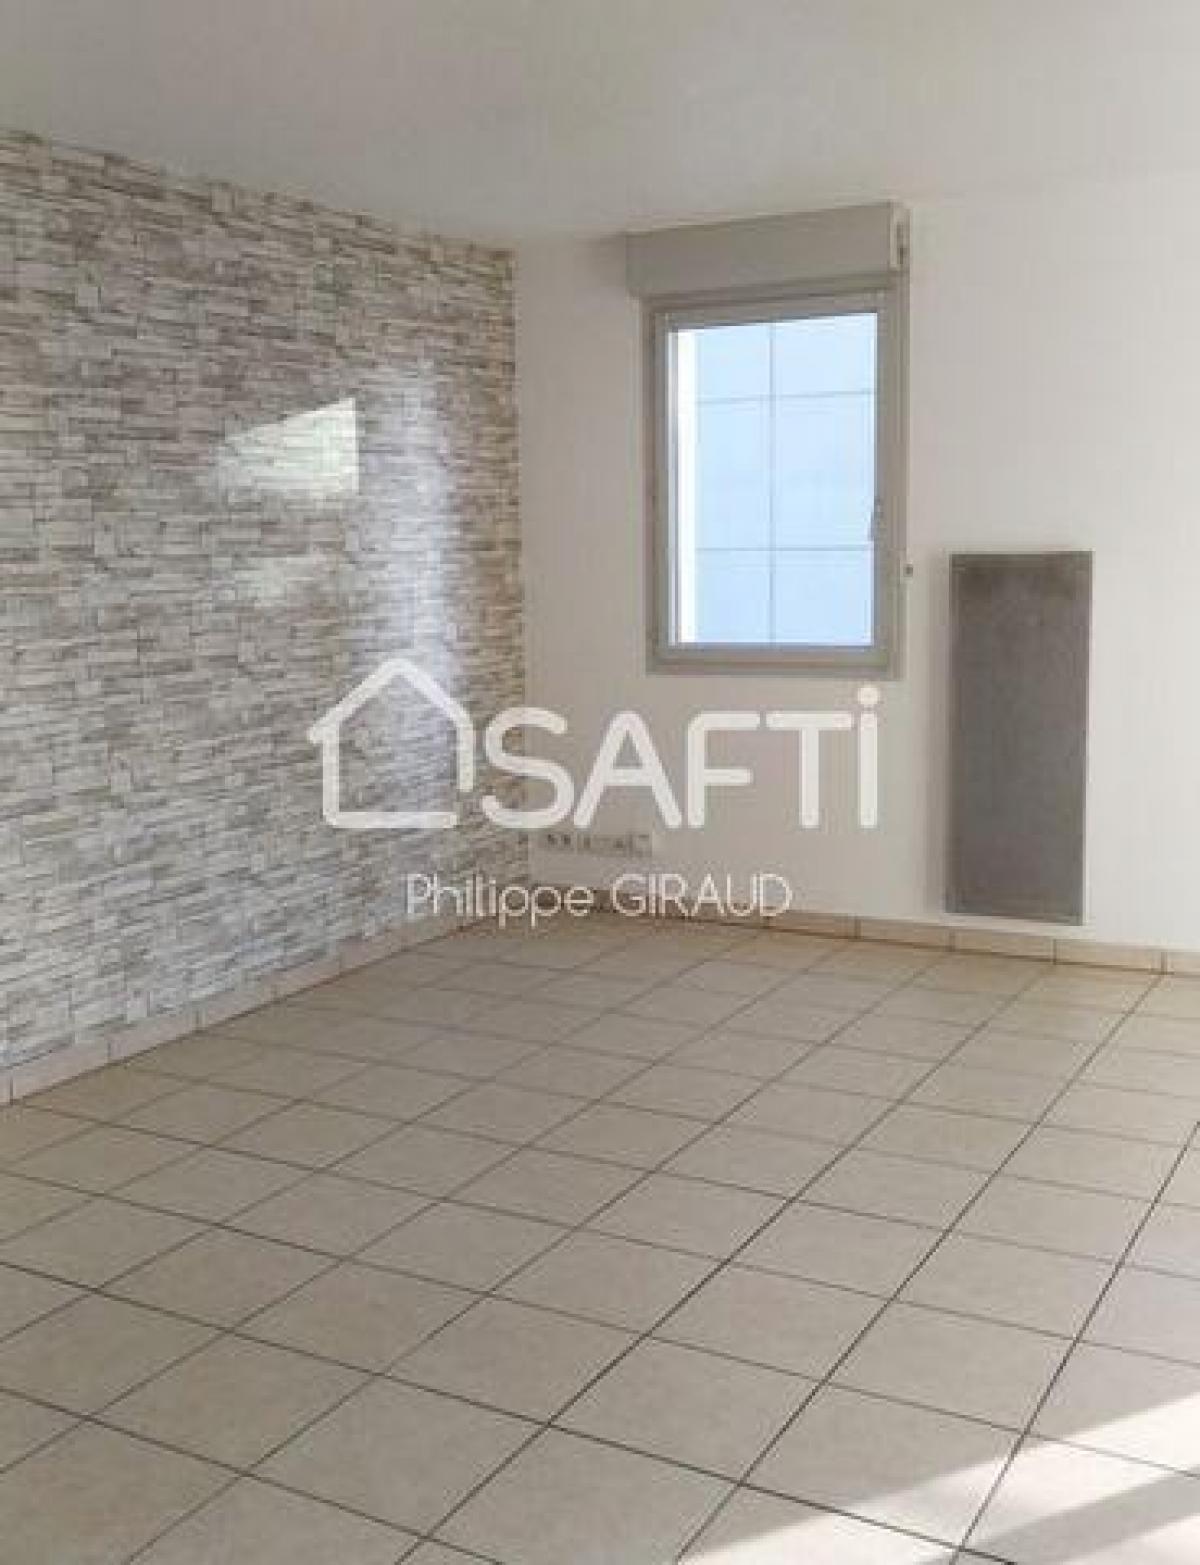 Picture of Apartment For Sale in Tours, Touraine, France